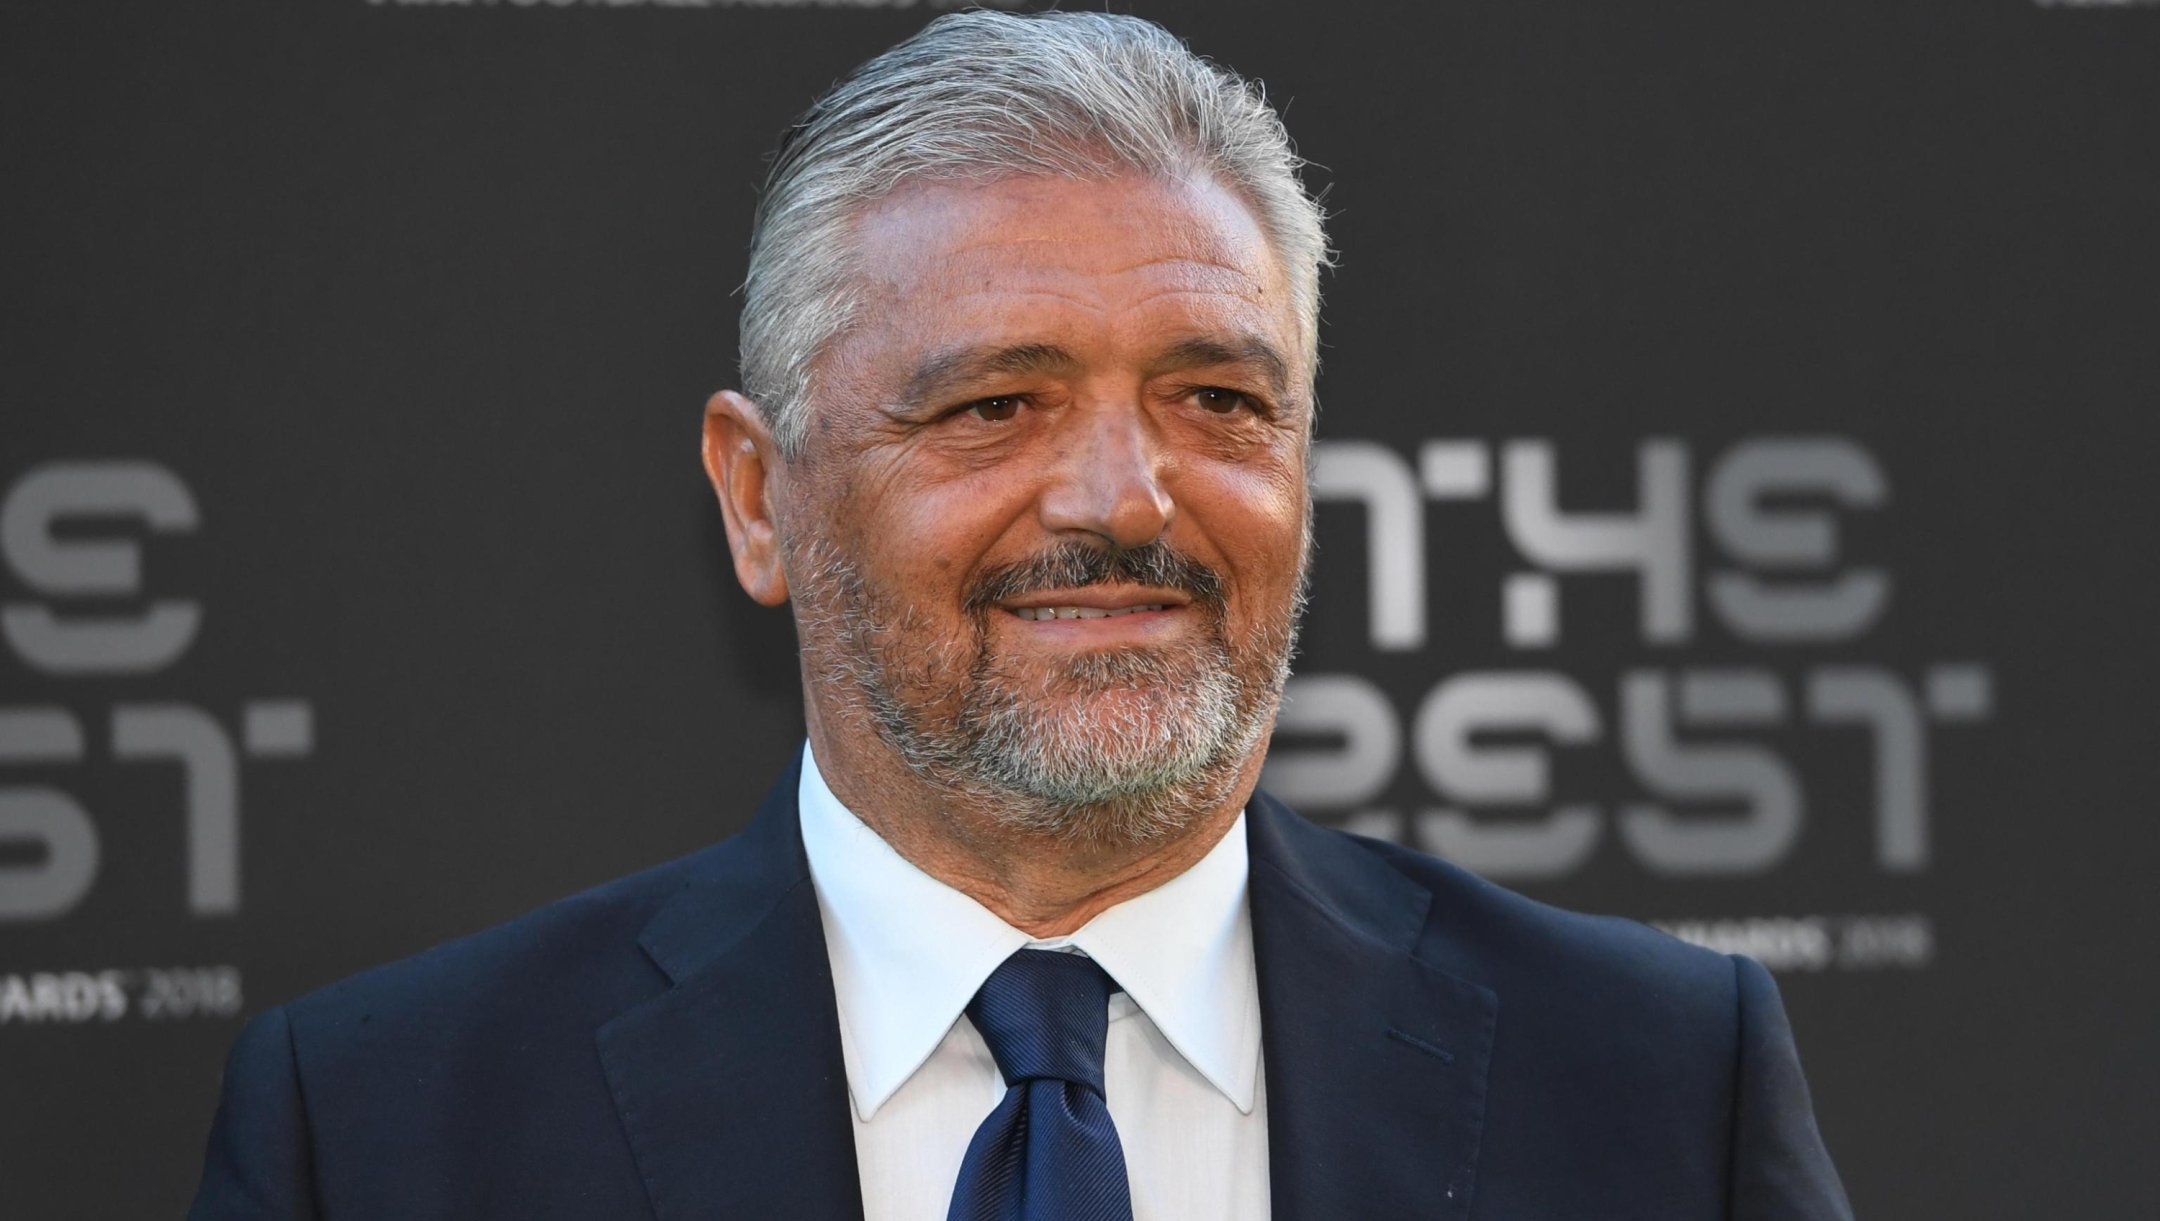 epa07043926 Former Italy player Alessandro Altobelli arrives for the Best FIFA Football Awards 2018 in London, Great Britain, 24 September 2018. Man in center is unidentified.  EPA/FACUNDO ARRIZABALAGA